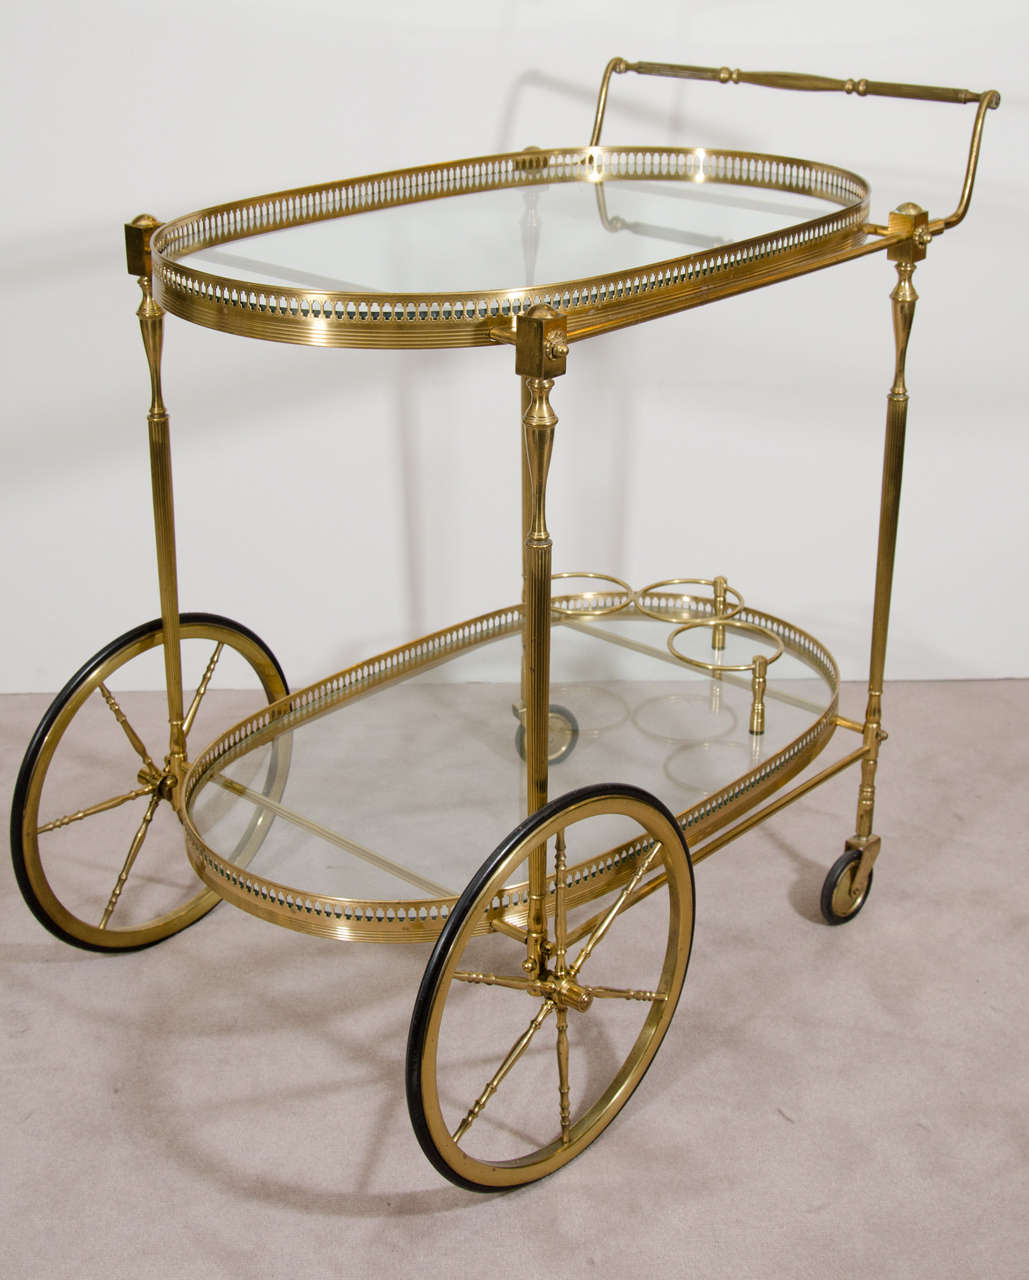 A vintage 1960s brass and glass bar cart with faux bamboo accents. There is a galleried top, two glass shelves, and three wine holders. 

Good vintage condition with age appropriate wear. There are a few minor chips in the glass on the top shelf